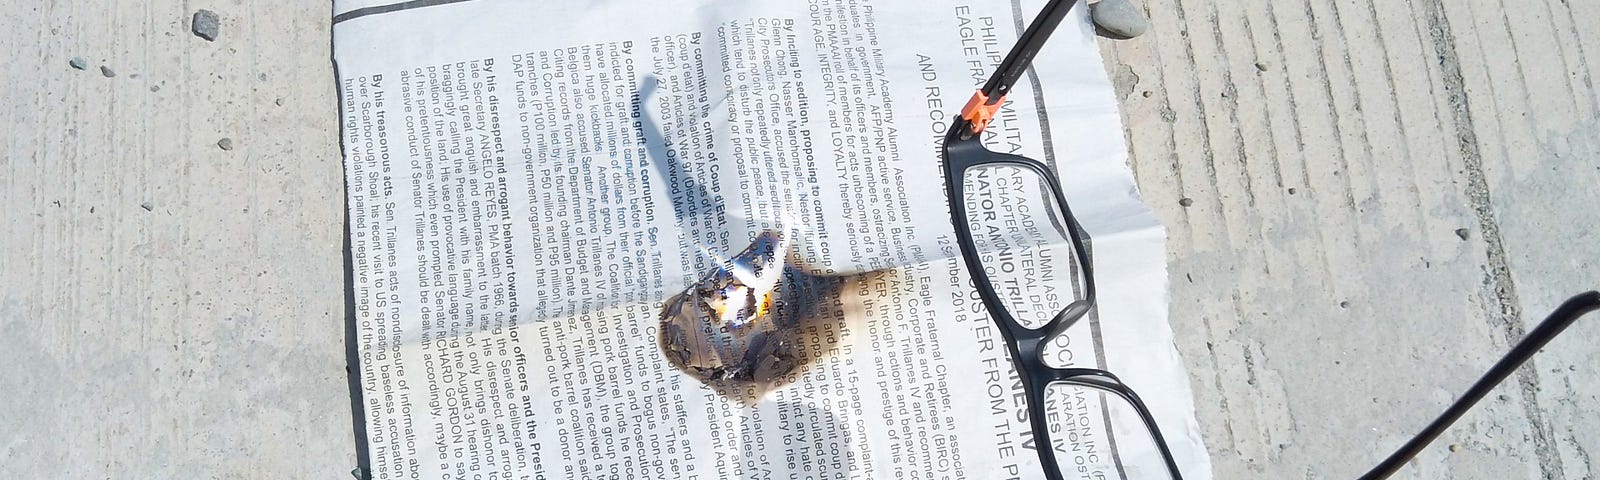 A pair of glasses are held under direct sunlight to start a fire on a newspaper.